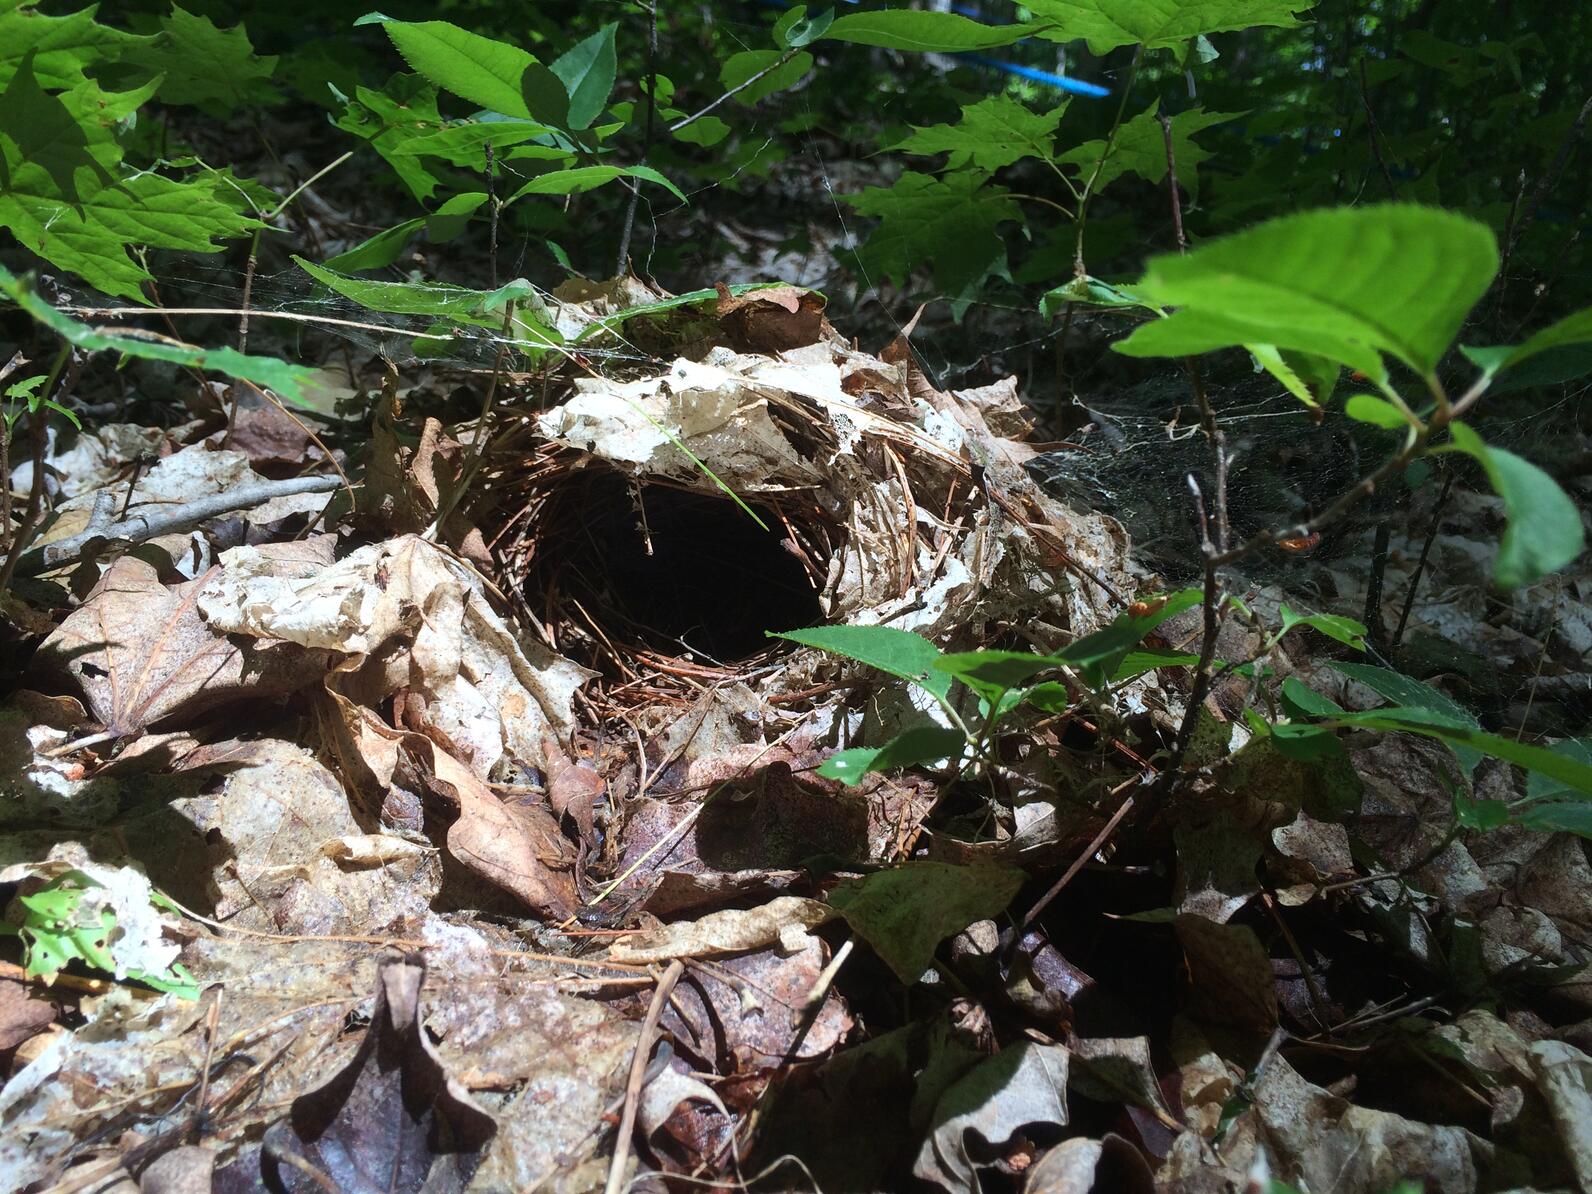 An Ovenbird nest - a well-camouflaged leafy construction on the forest floor. 